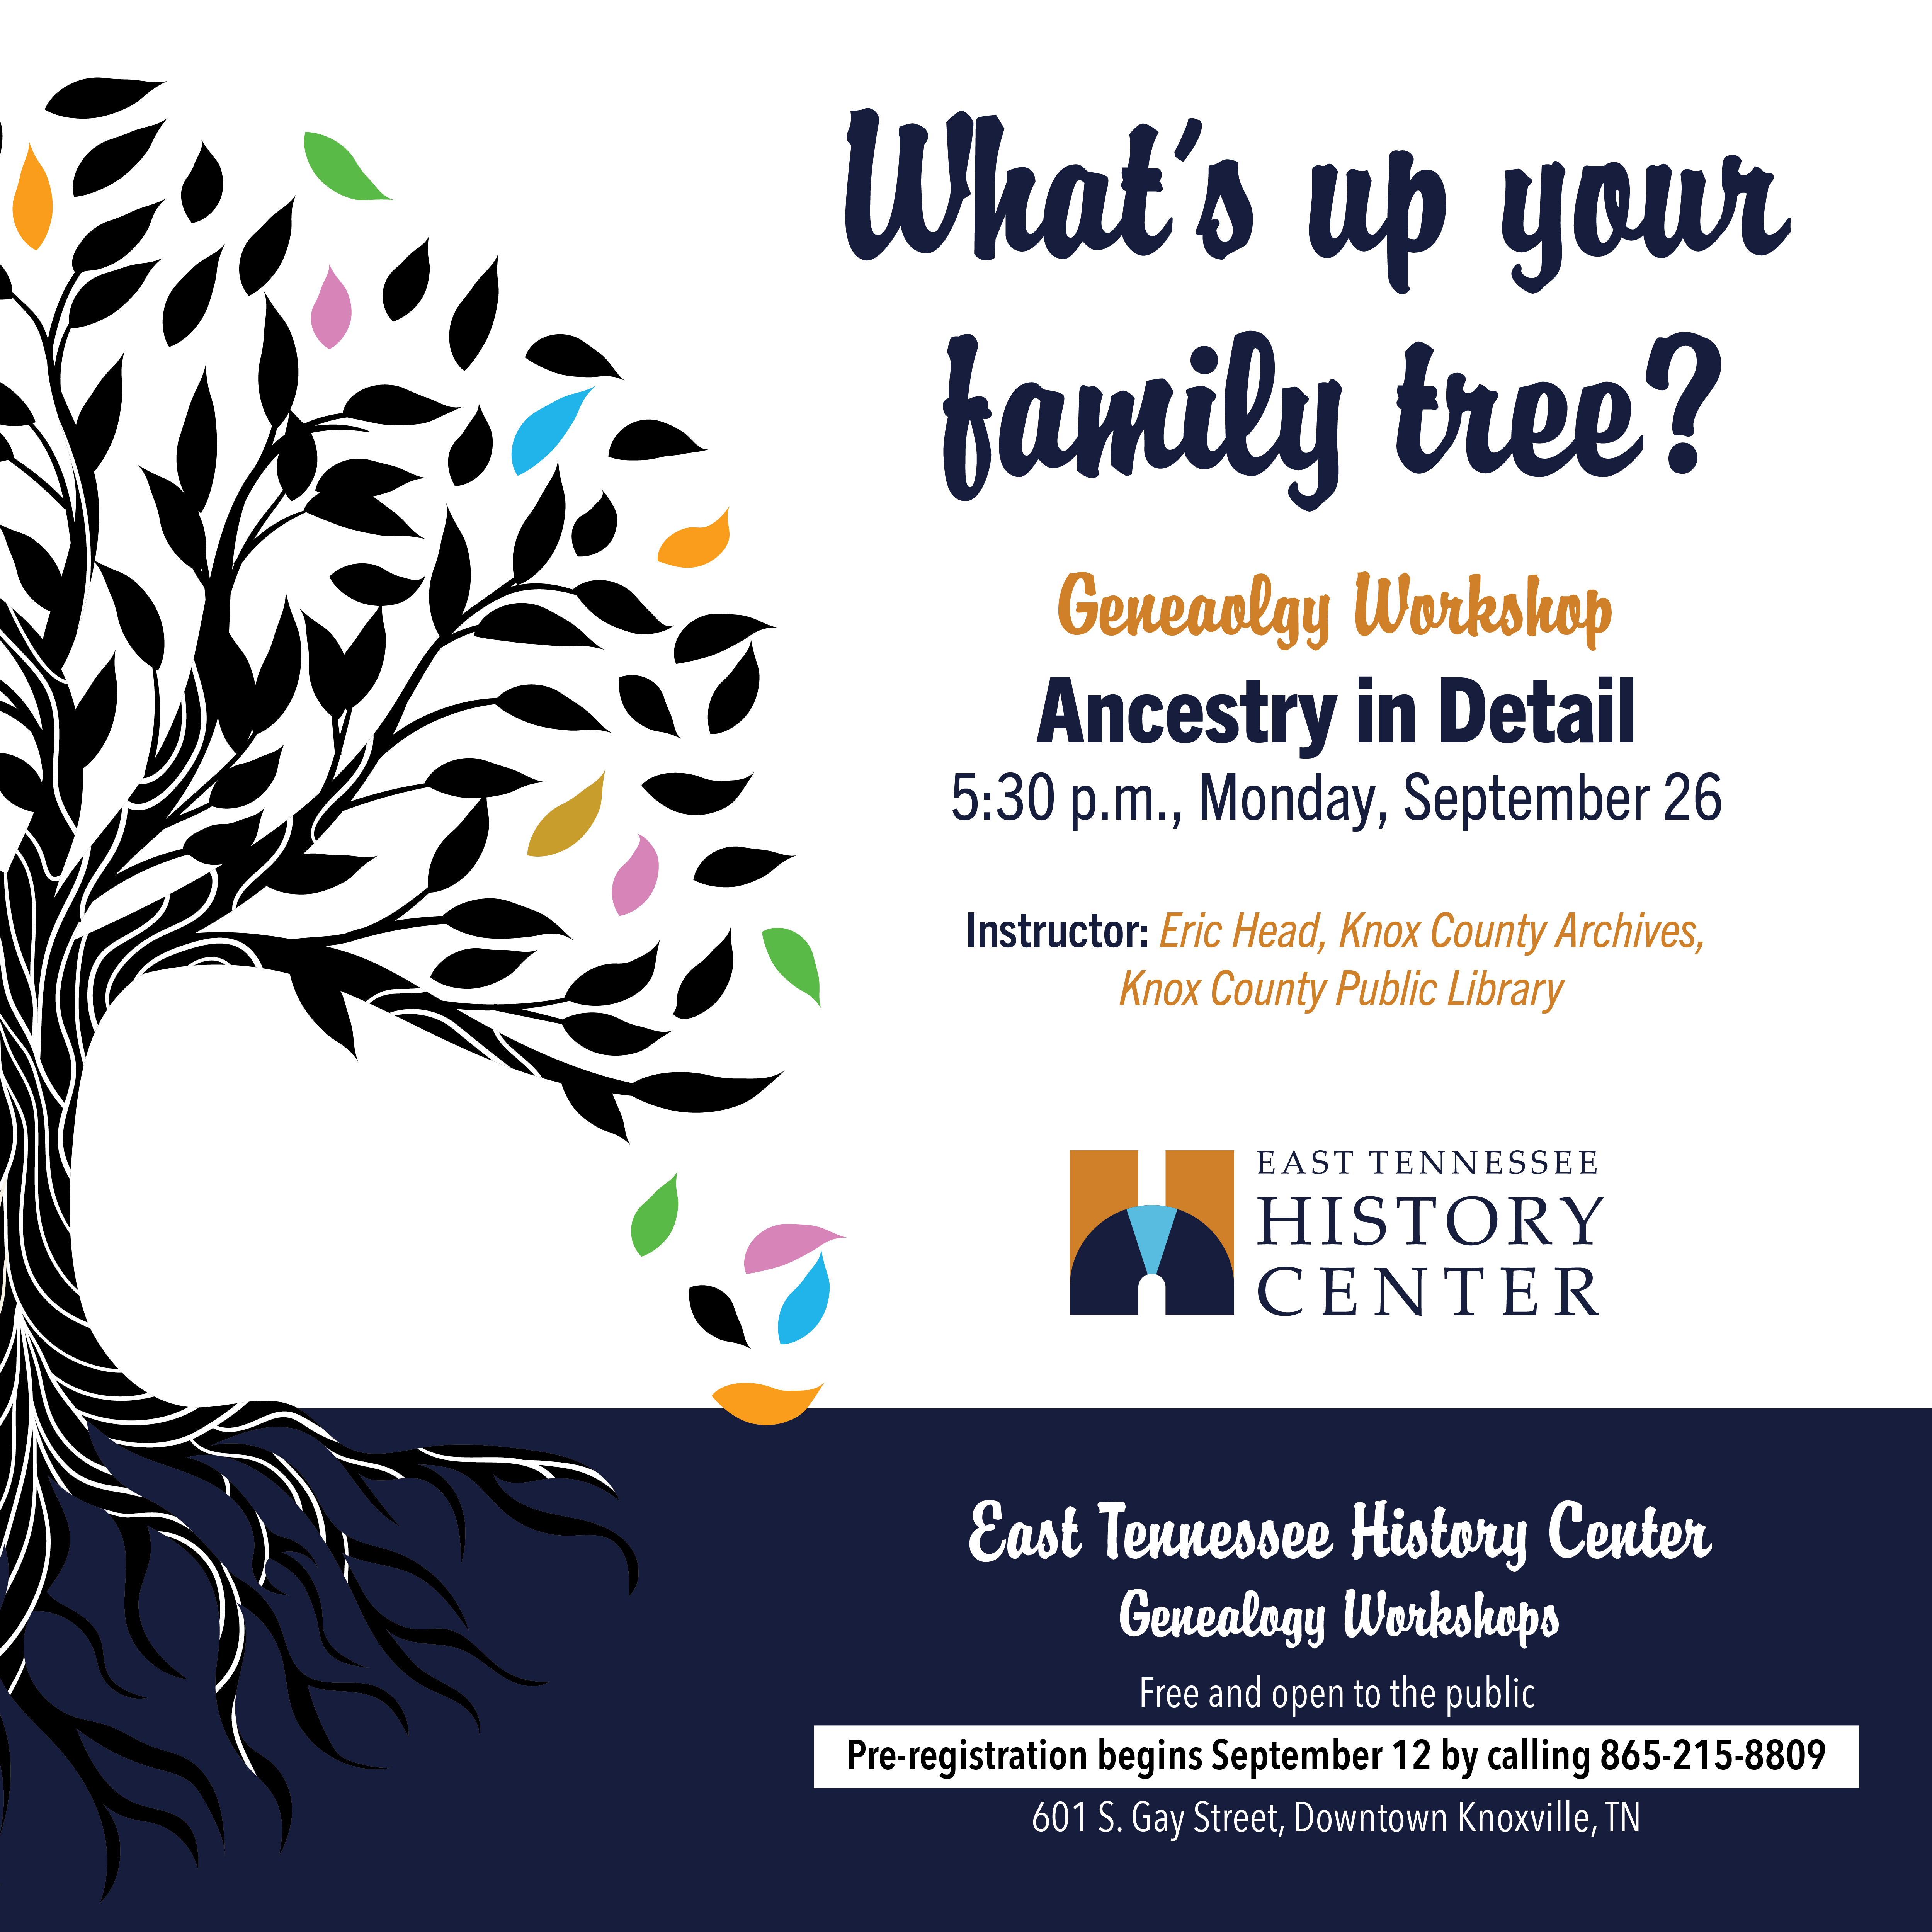 Ancestry in Details